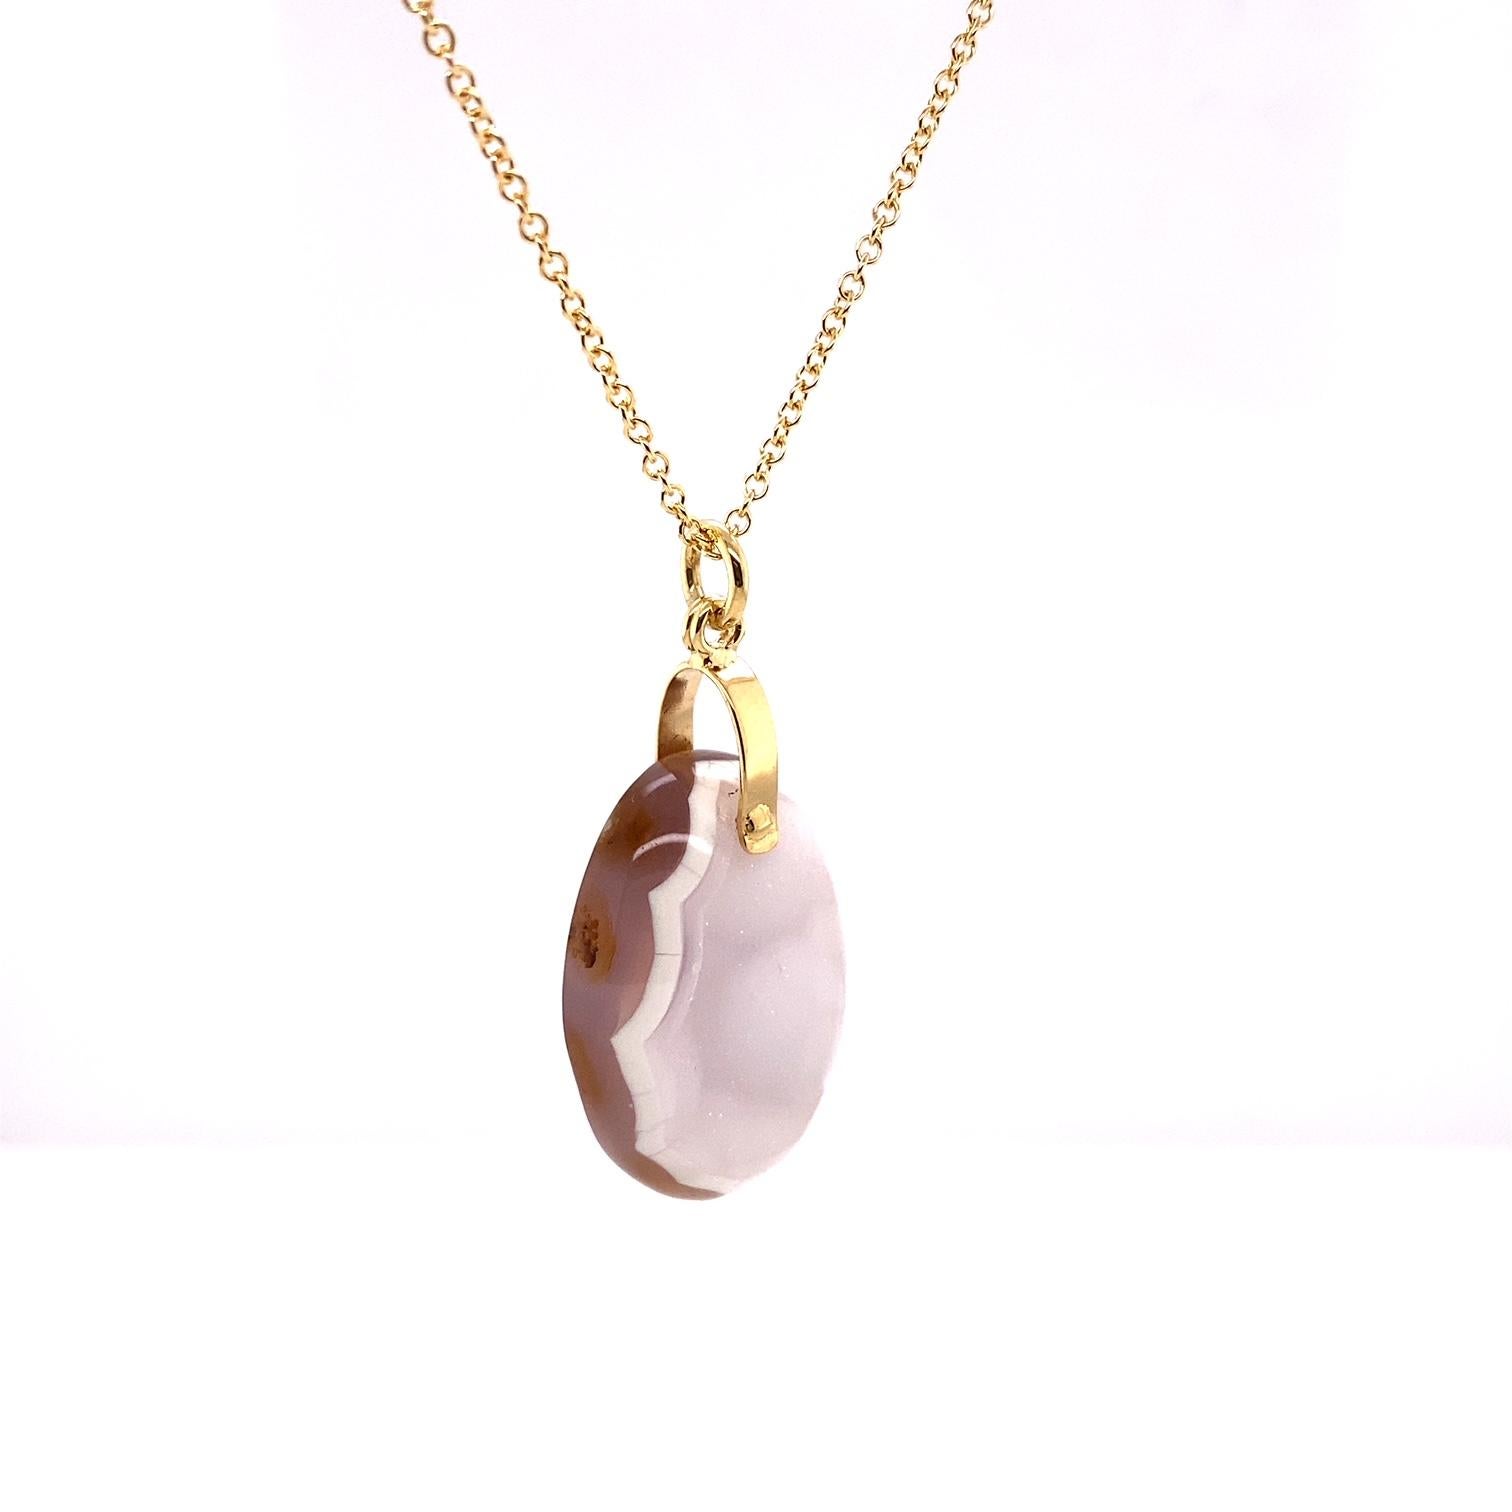 An 18k yellow gold oval white druzy pendant on a 14k yellow gold 1.5mm 18 inch cable chain. This necklace was made and designed by llyn strong.